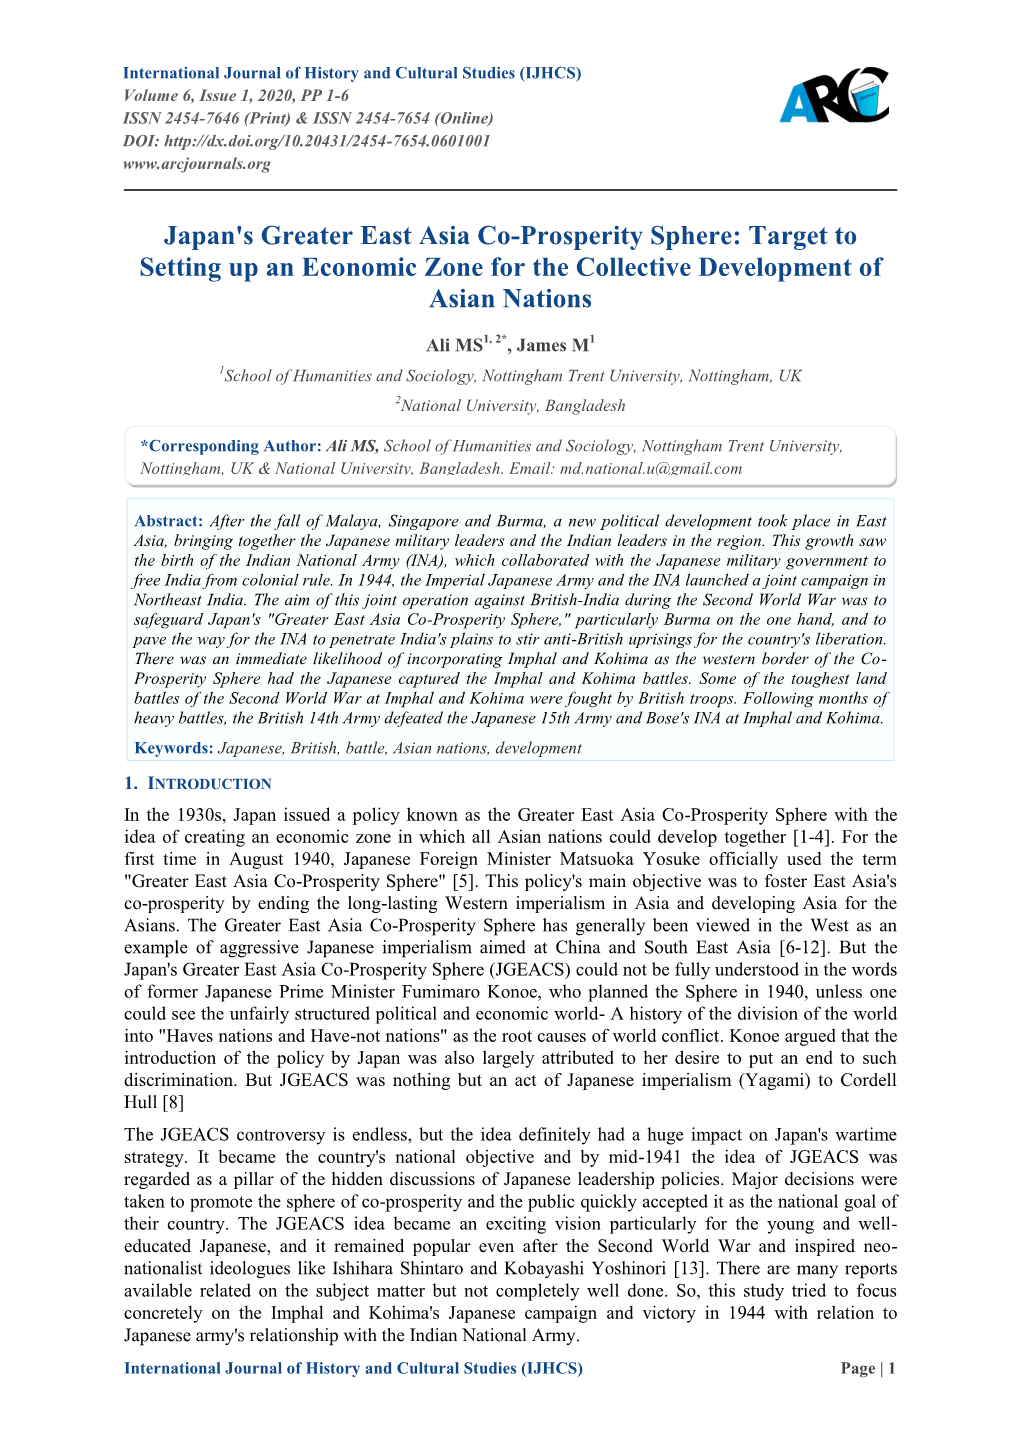 Japan's Greater East Asia Co-Prosperity Sphere: Target to Setting up an Economic Zone for the Collective Development of Asian Nations